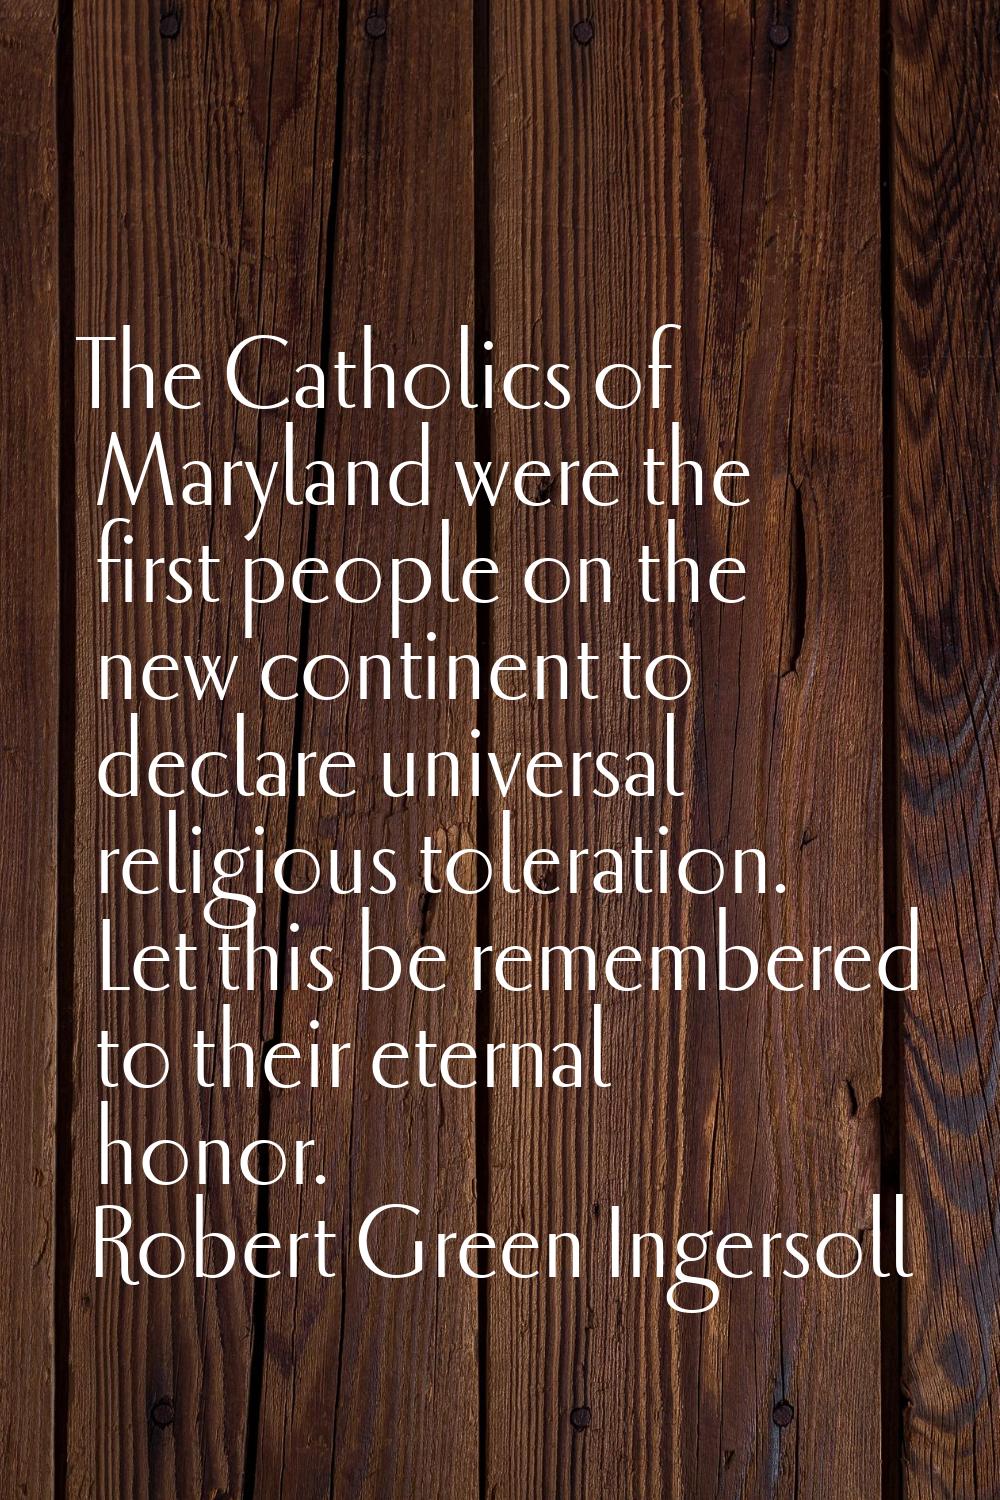 The Catholics of Maryland were the first people on the new continent to declare universal religious